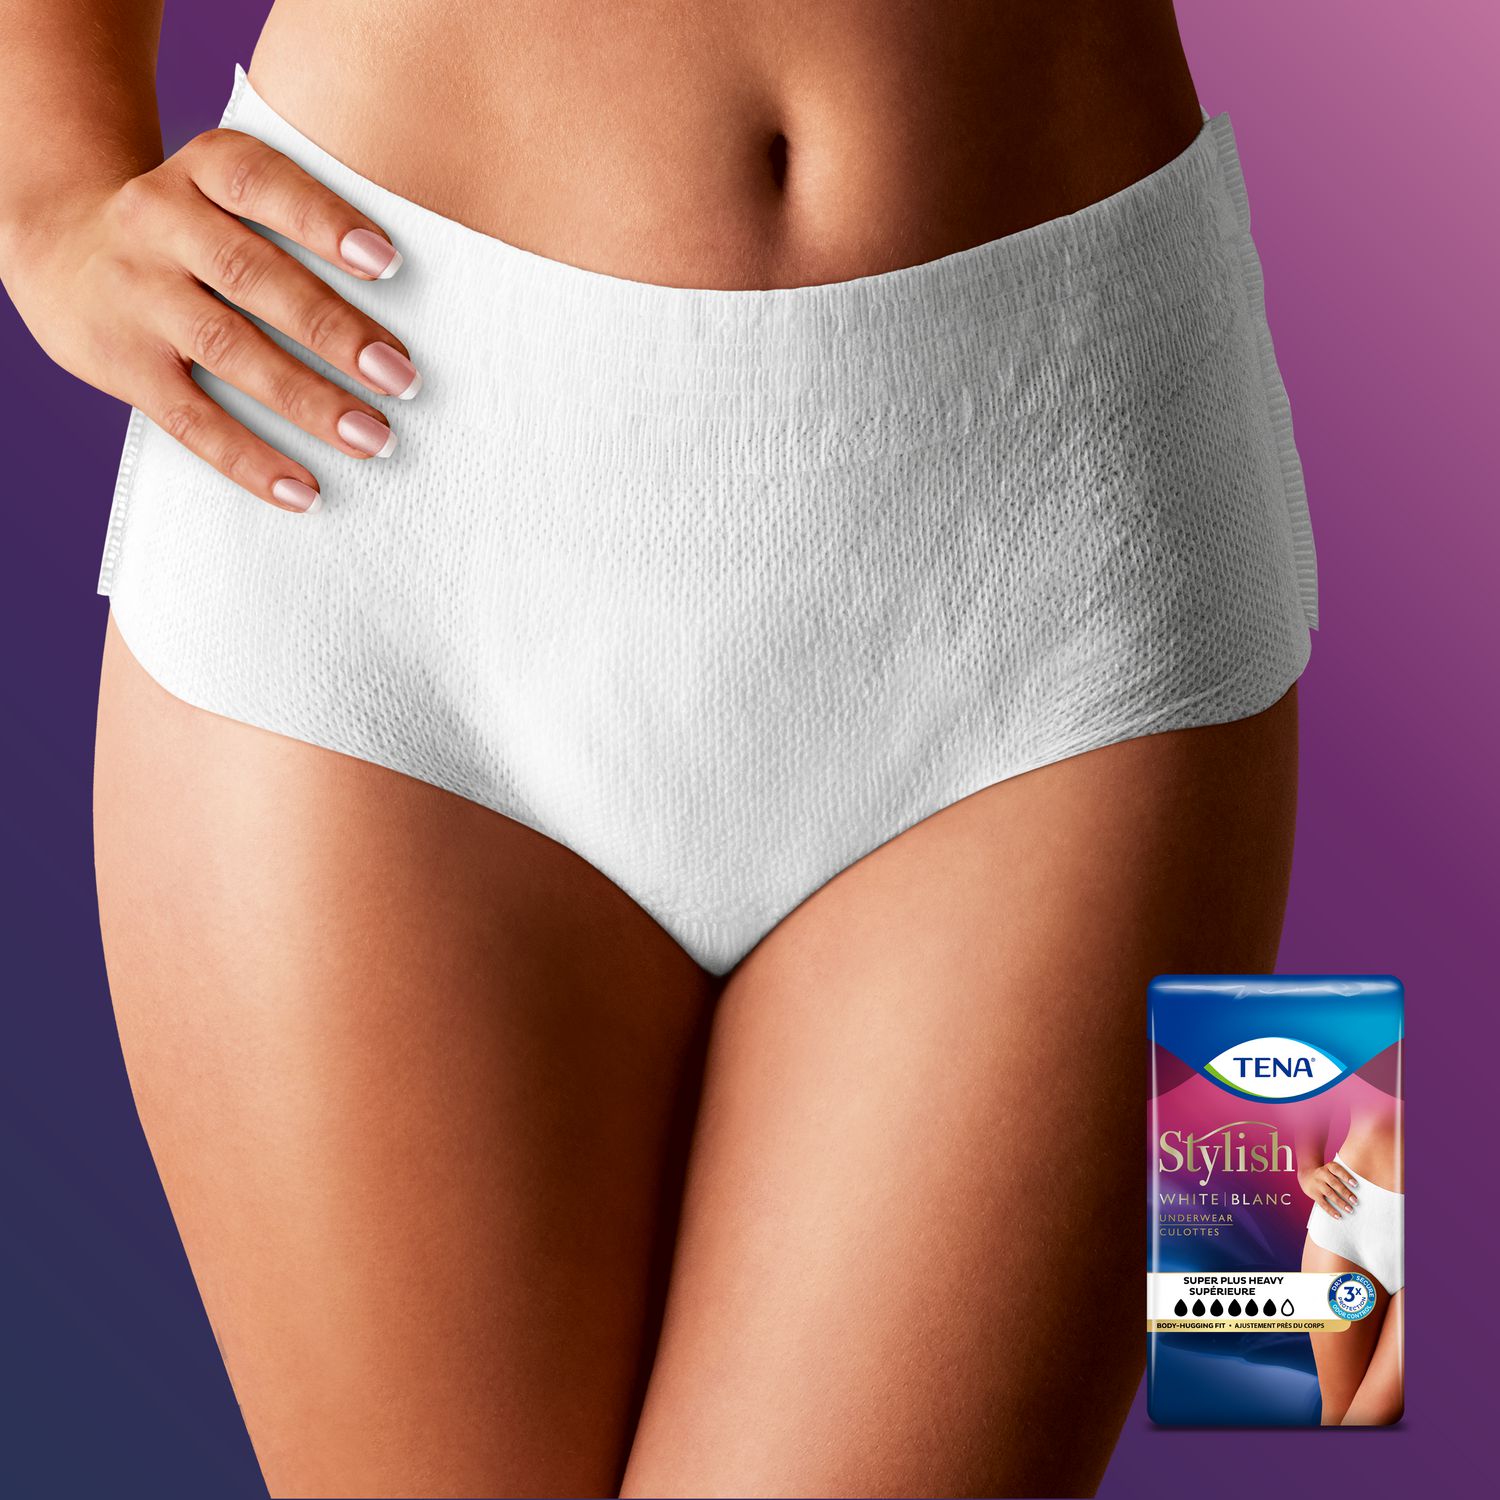 TENA Incontinence Underwear for Women, Super Plus Absorbency, Large, 16  Count, 16 Count, Large 